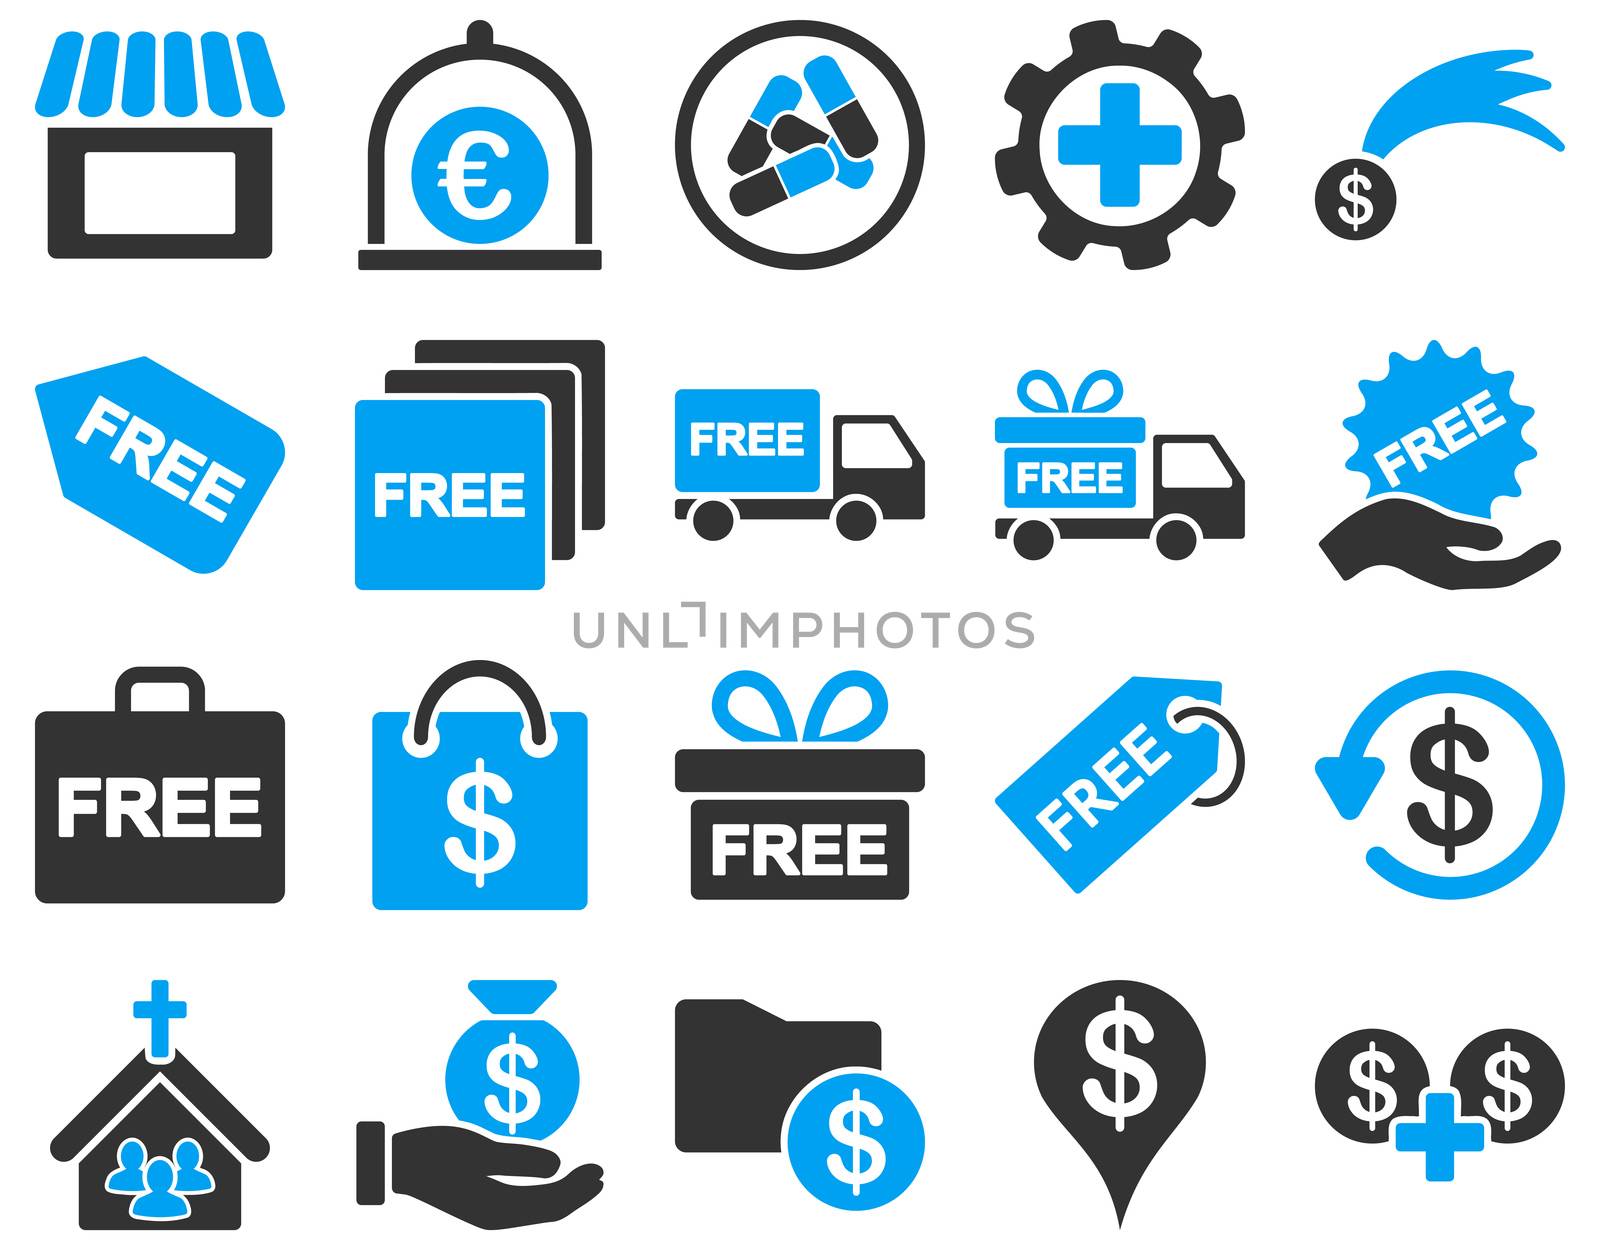 Shipment service and gift icon set. These flat bicolor symbols use modern corporate light blue and gray colors. Glyph images are isolated on a white background. Angles are rounded.